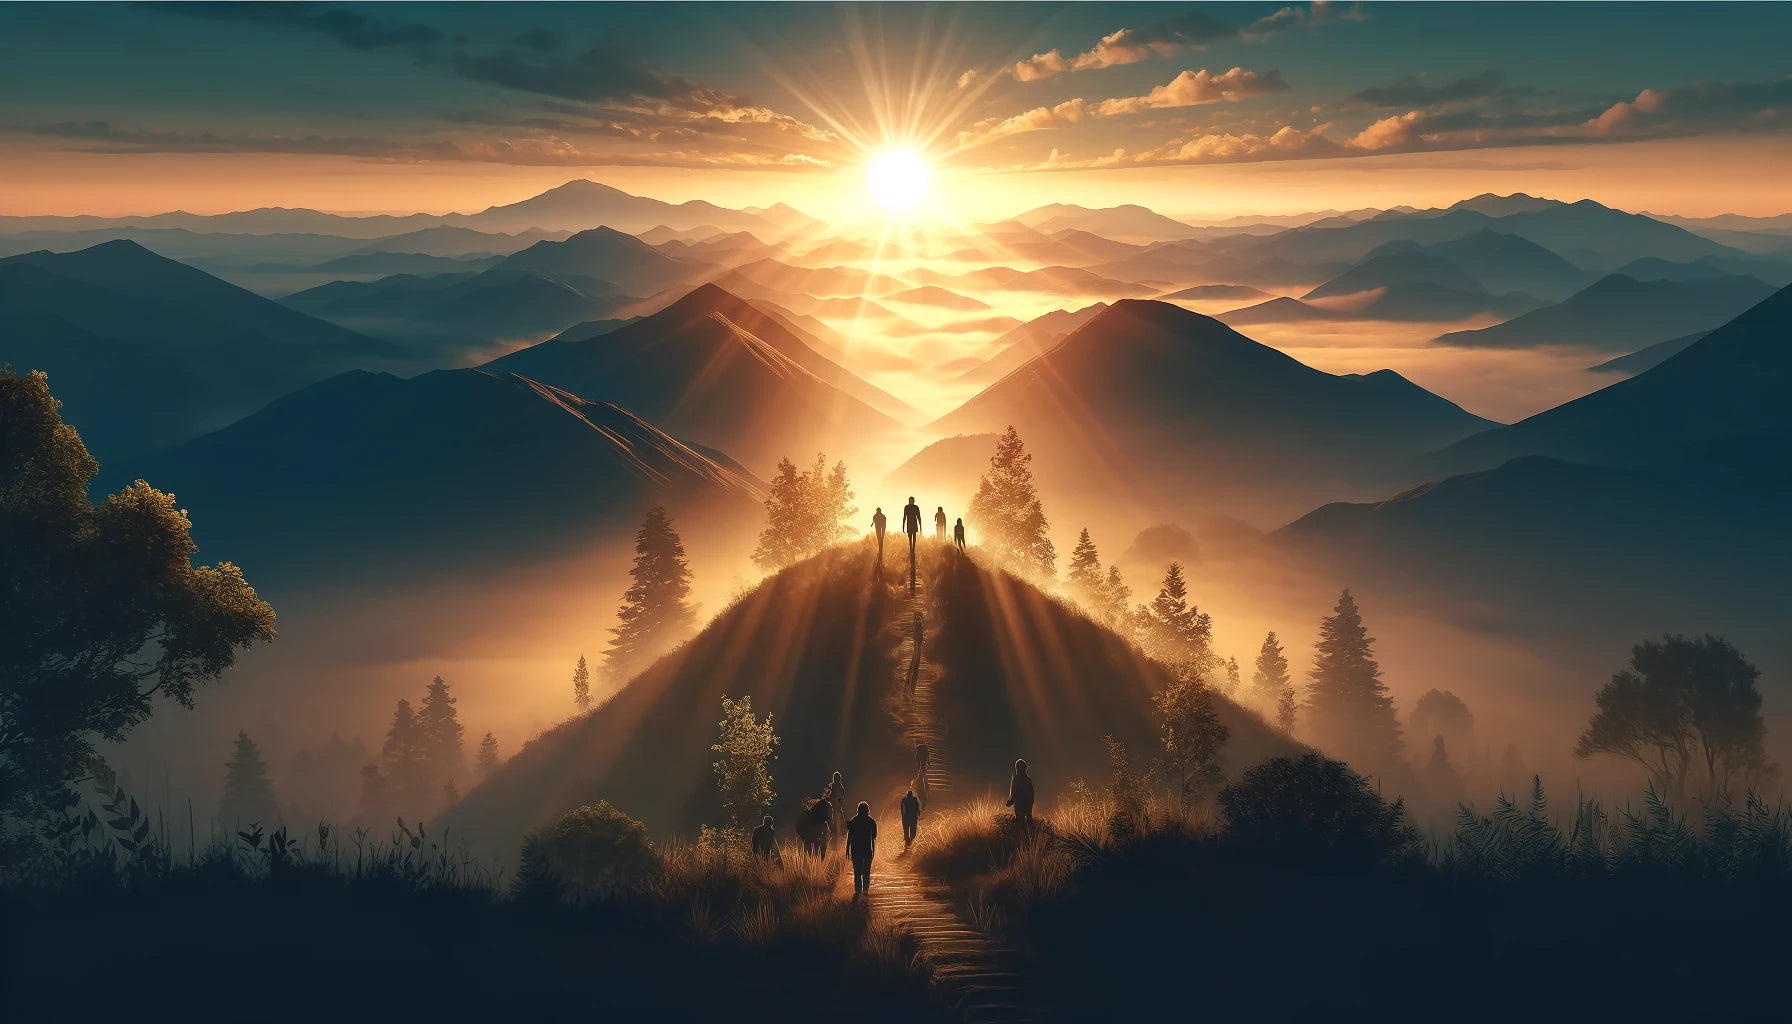 An inspirational website banner showing a group of individuals walking up a path towards the summit of a mountain at sunrise. The sun casts a radiant glow that illuminates the mountainous landscape, with rays piercing through mist and silhouetting the climbers. The scene, set against a backdrop of layered mountains and a dawning sky, evokes a sense of new beginnings, personal growth, and the journey towards achieving one's highest potential.